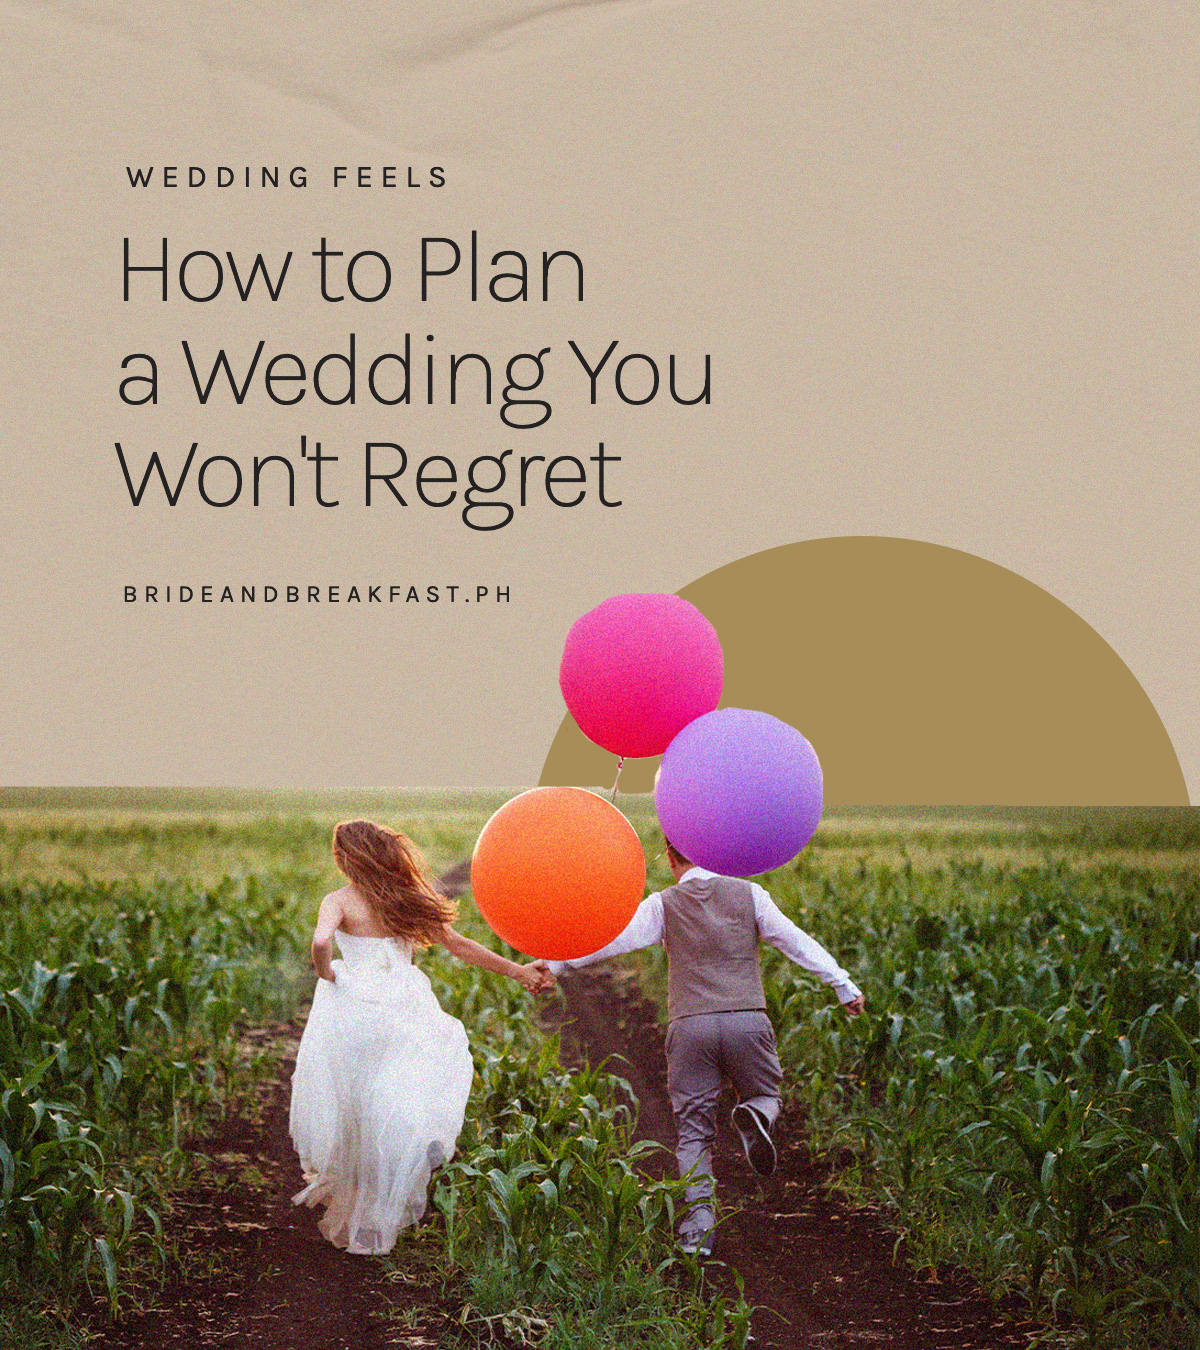 How to Plan a Wedding You Won't Regret